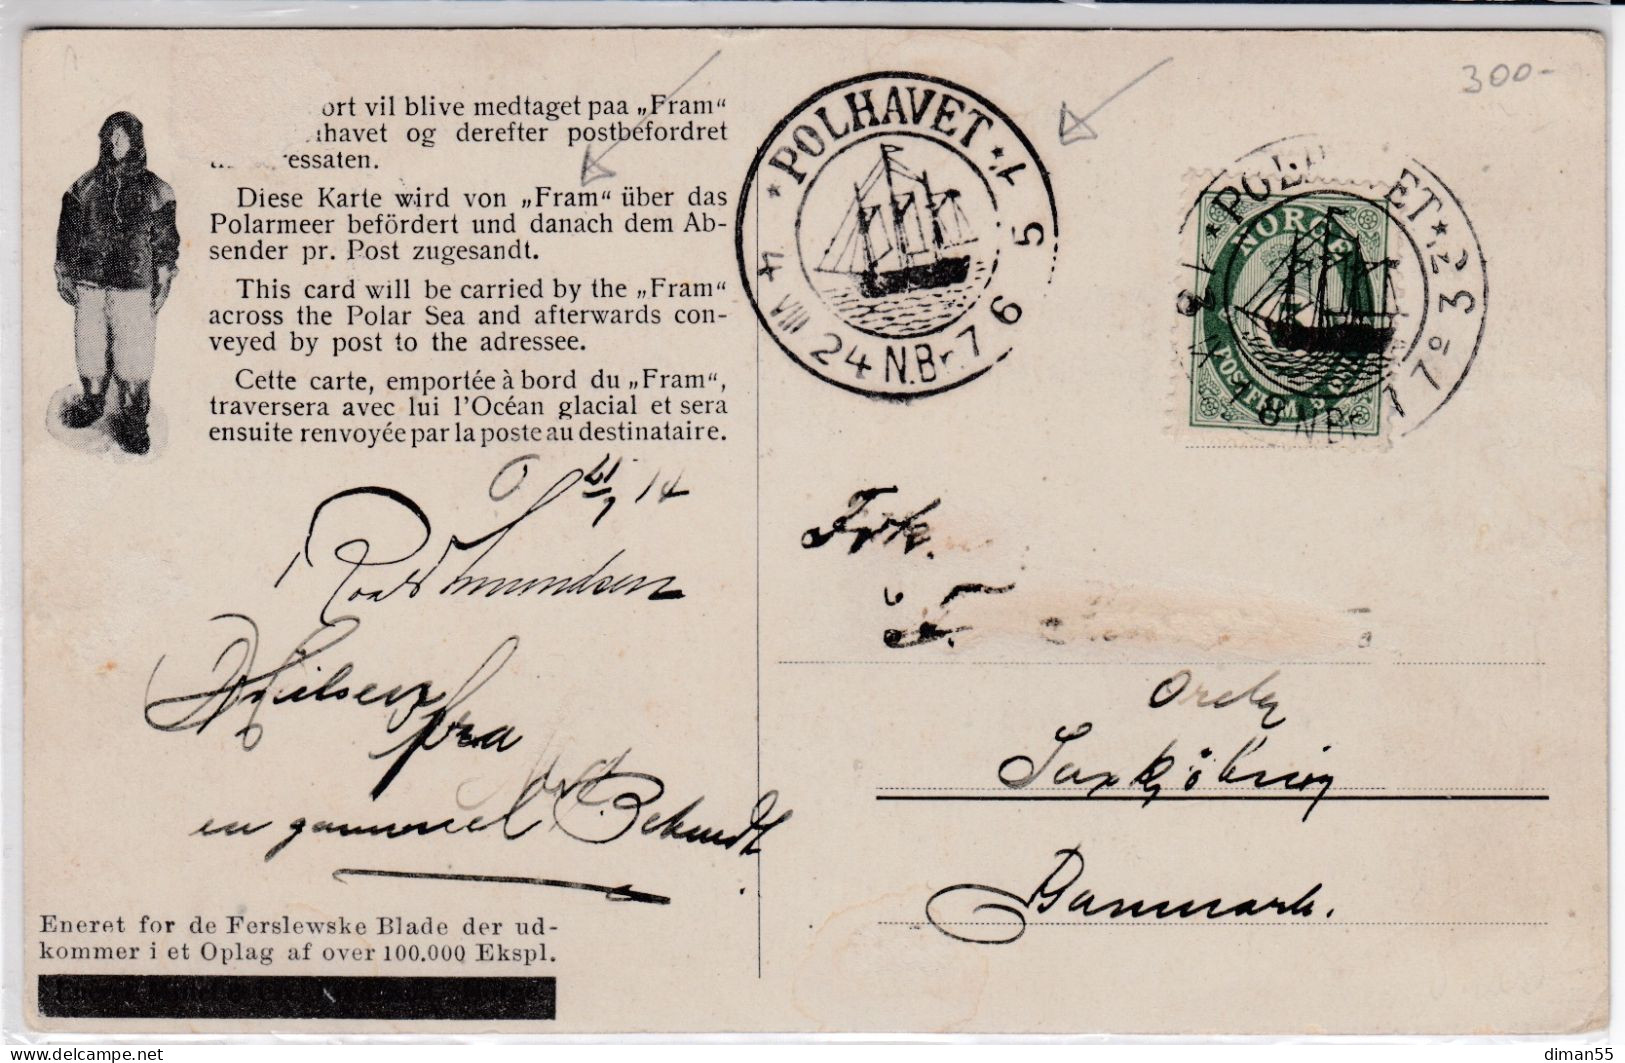 NORWAY - POLAR CRUISE - POLHAVET 4-8-1924 POSTAL CARD - Very Rare And HV - Covers & Documents